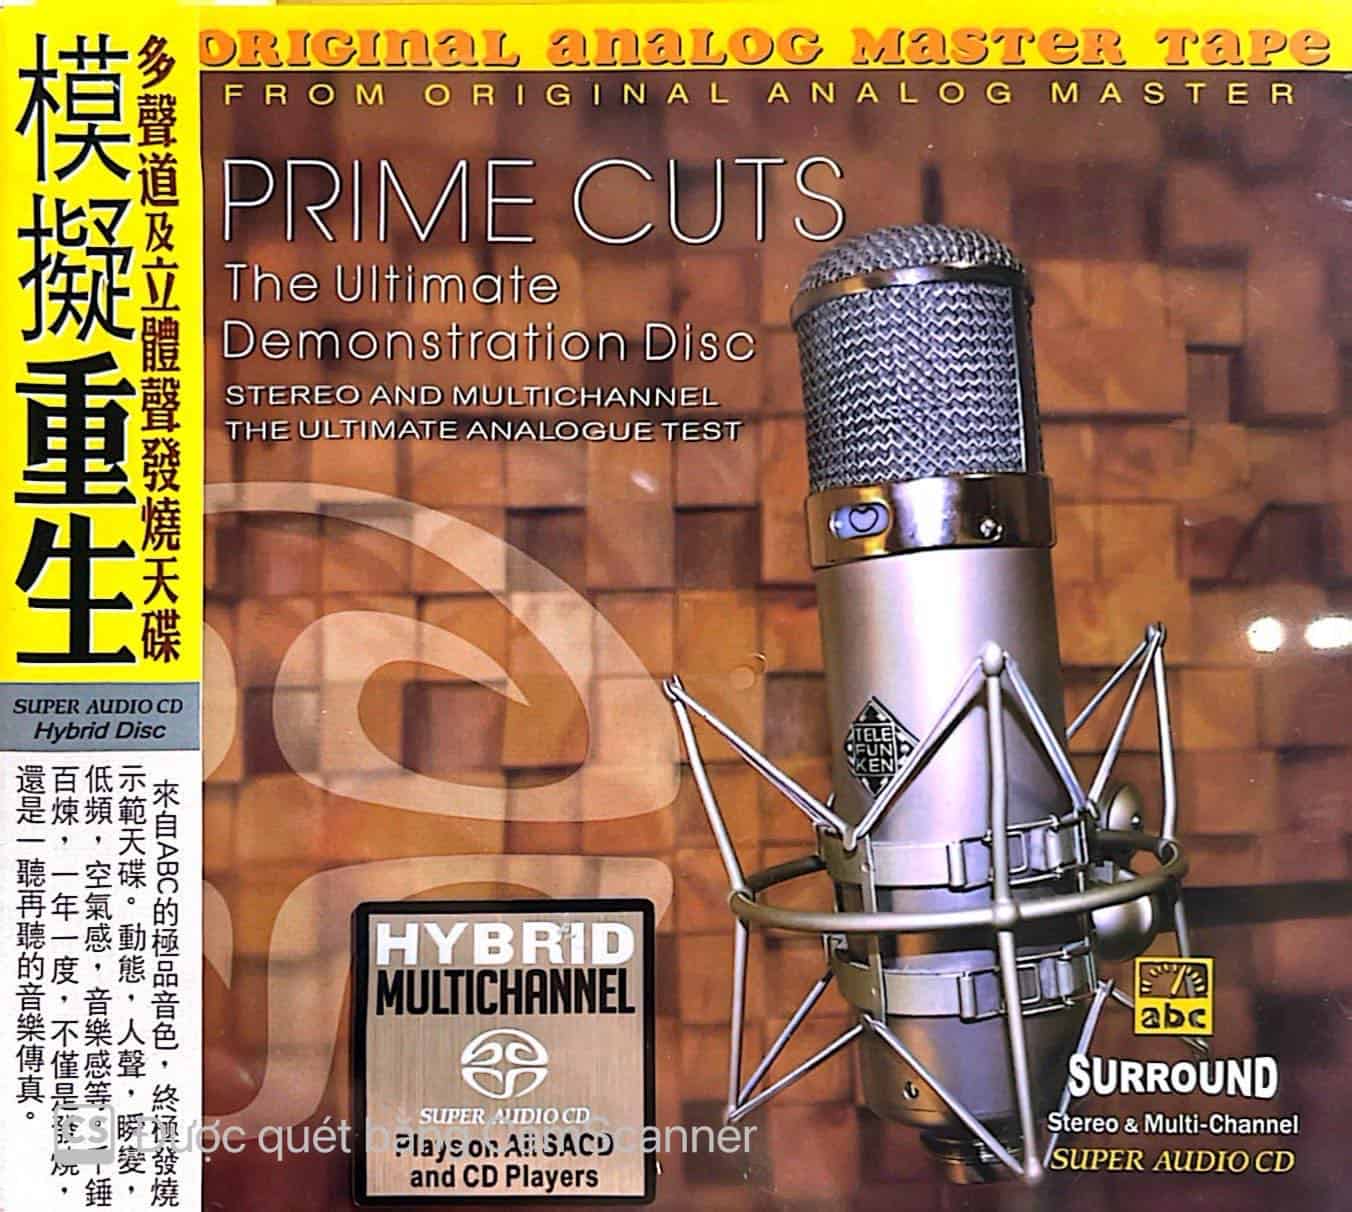 Prime Cut - The Ultimate Demonstration Disc - Stereo And Multichannel The Ultimate Analogue Test